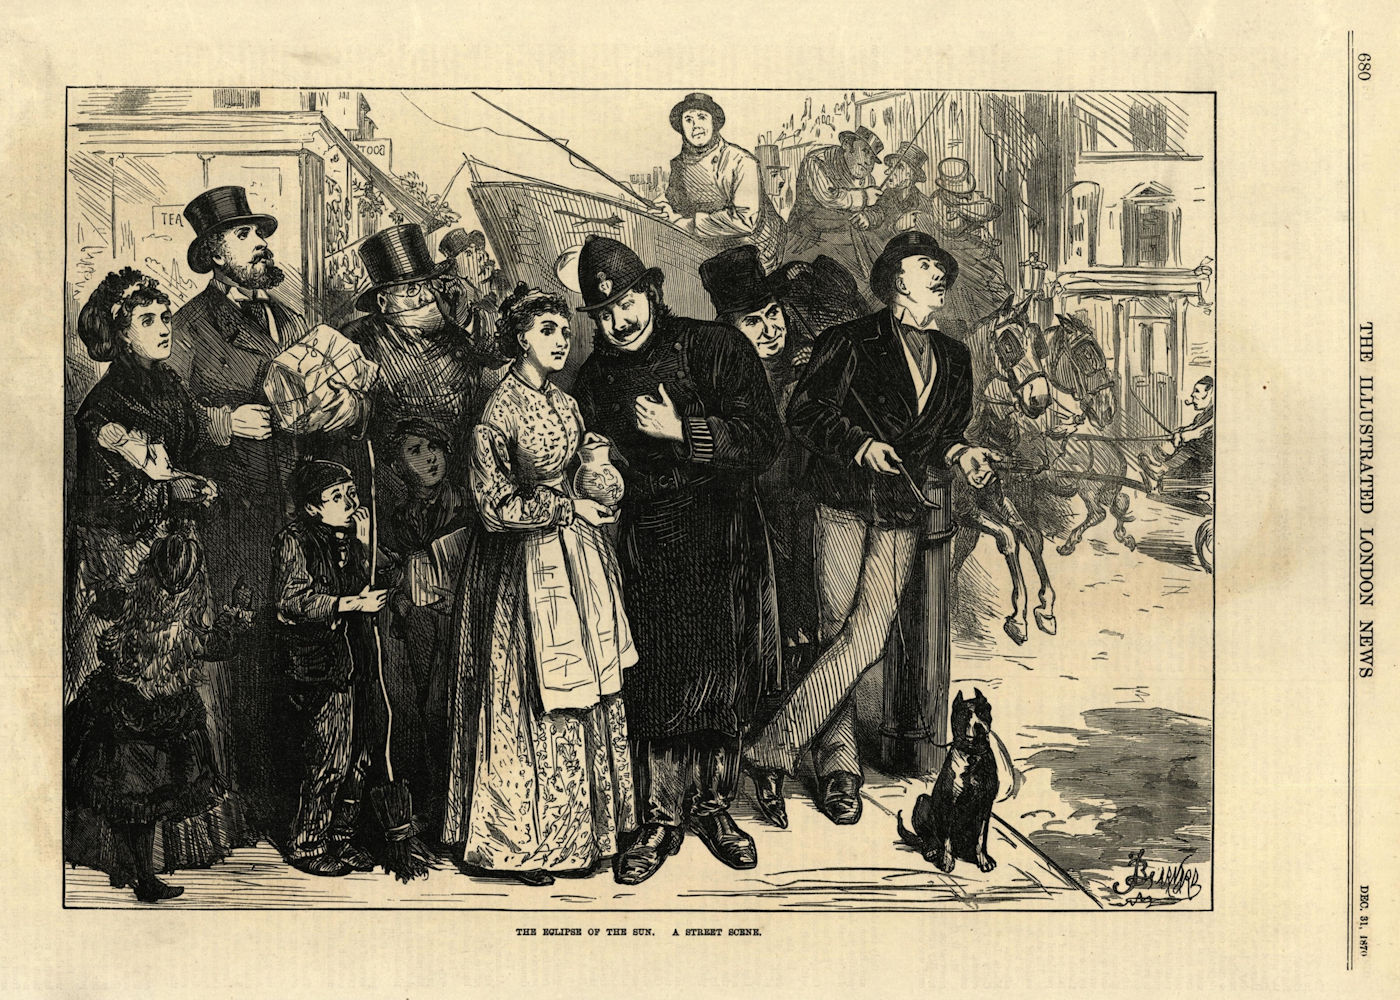 The eclipse of the sun: a street scene. Society. Astronomy 1870 old print